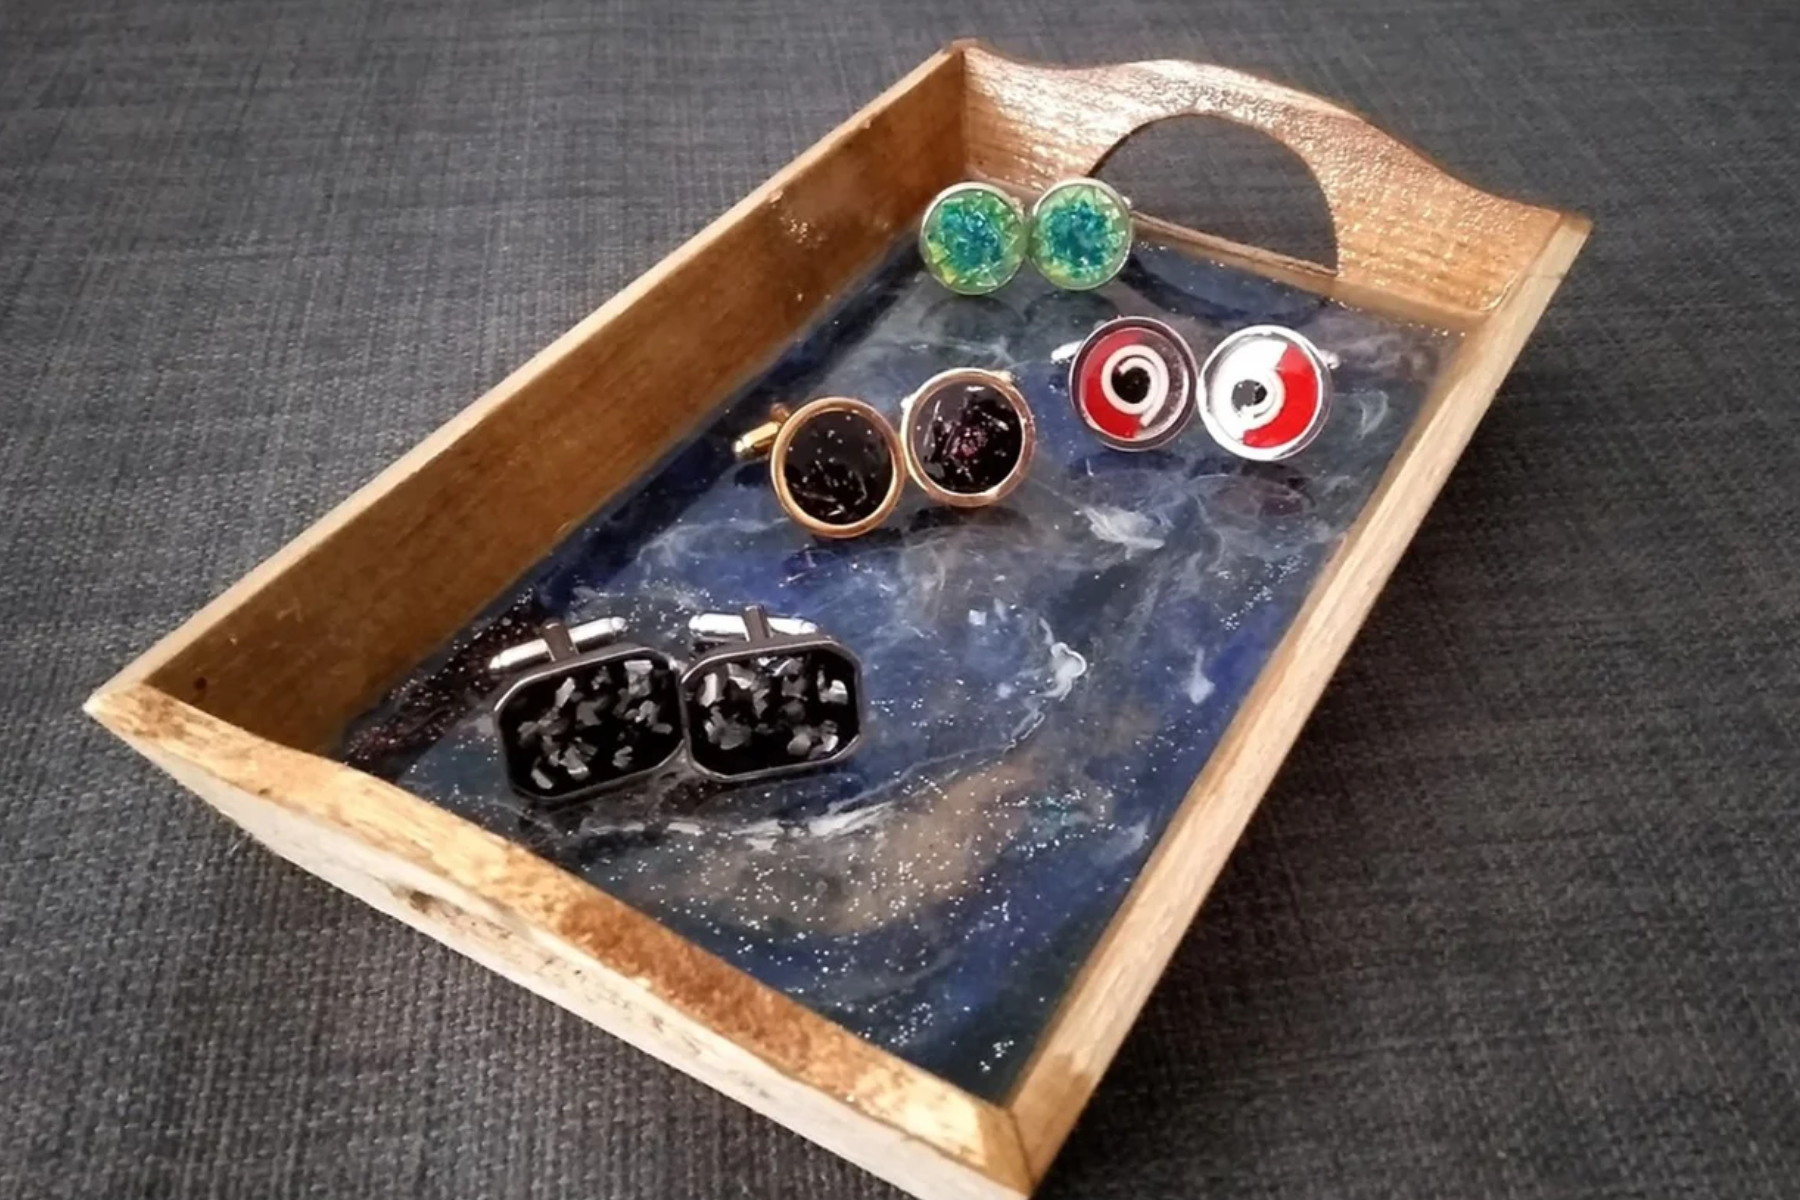 Four space-themed cufflinks on a wooden tray